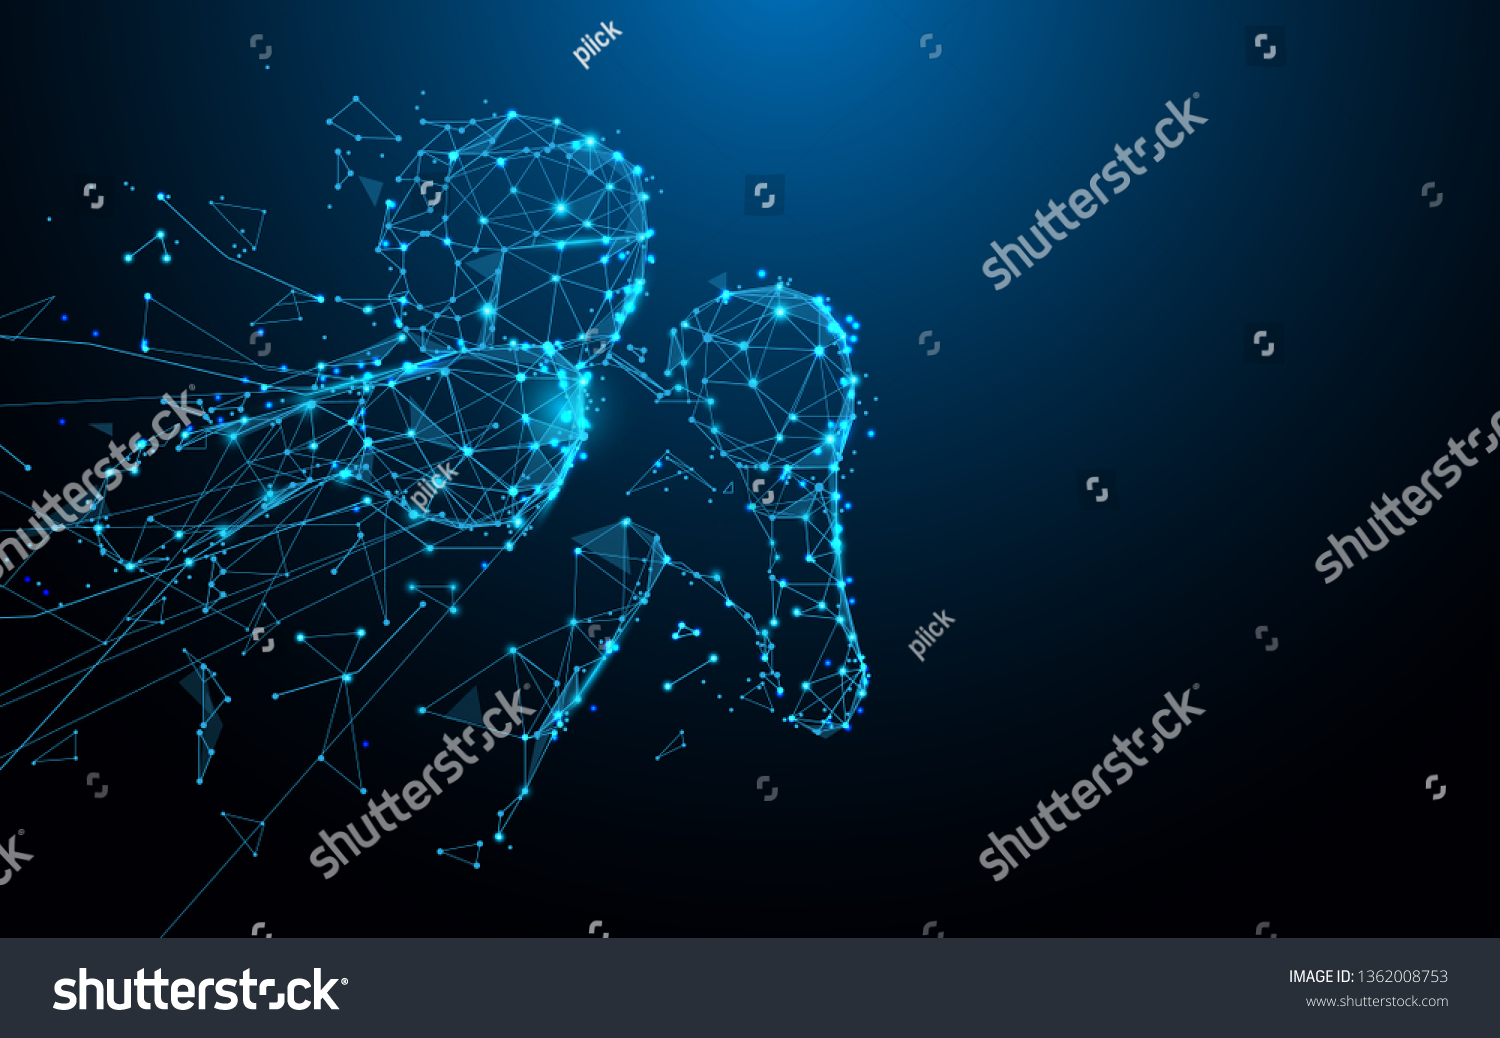 Man boxer doing shadow boxing from lines, triangles and particle style design. Illustration vector #1362008753